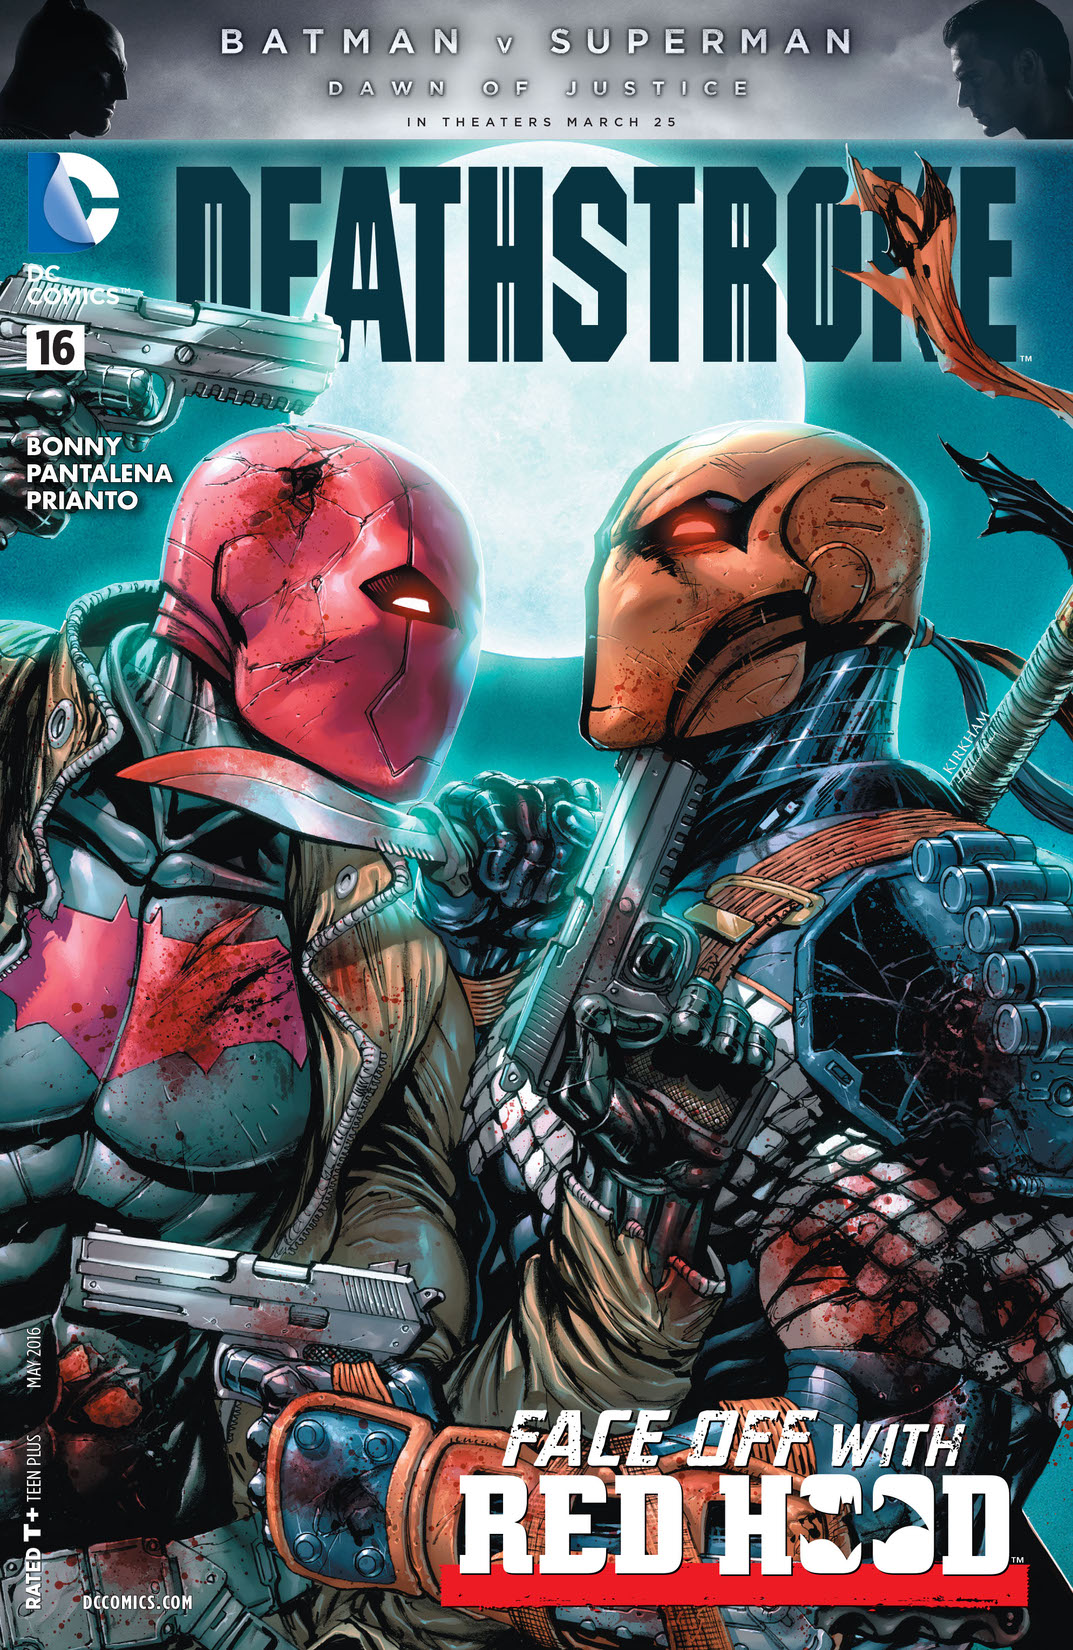 Deathstroke (2014-) #16 preview images